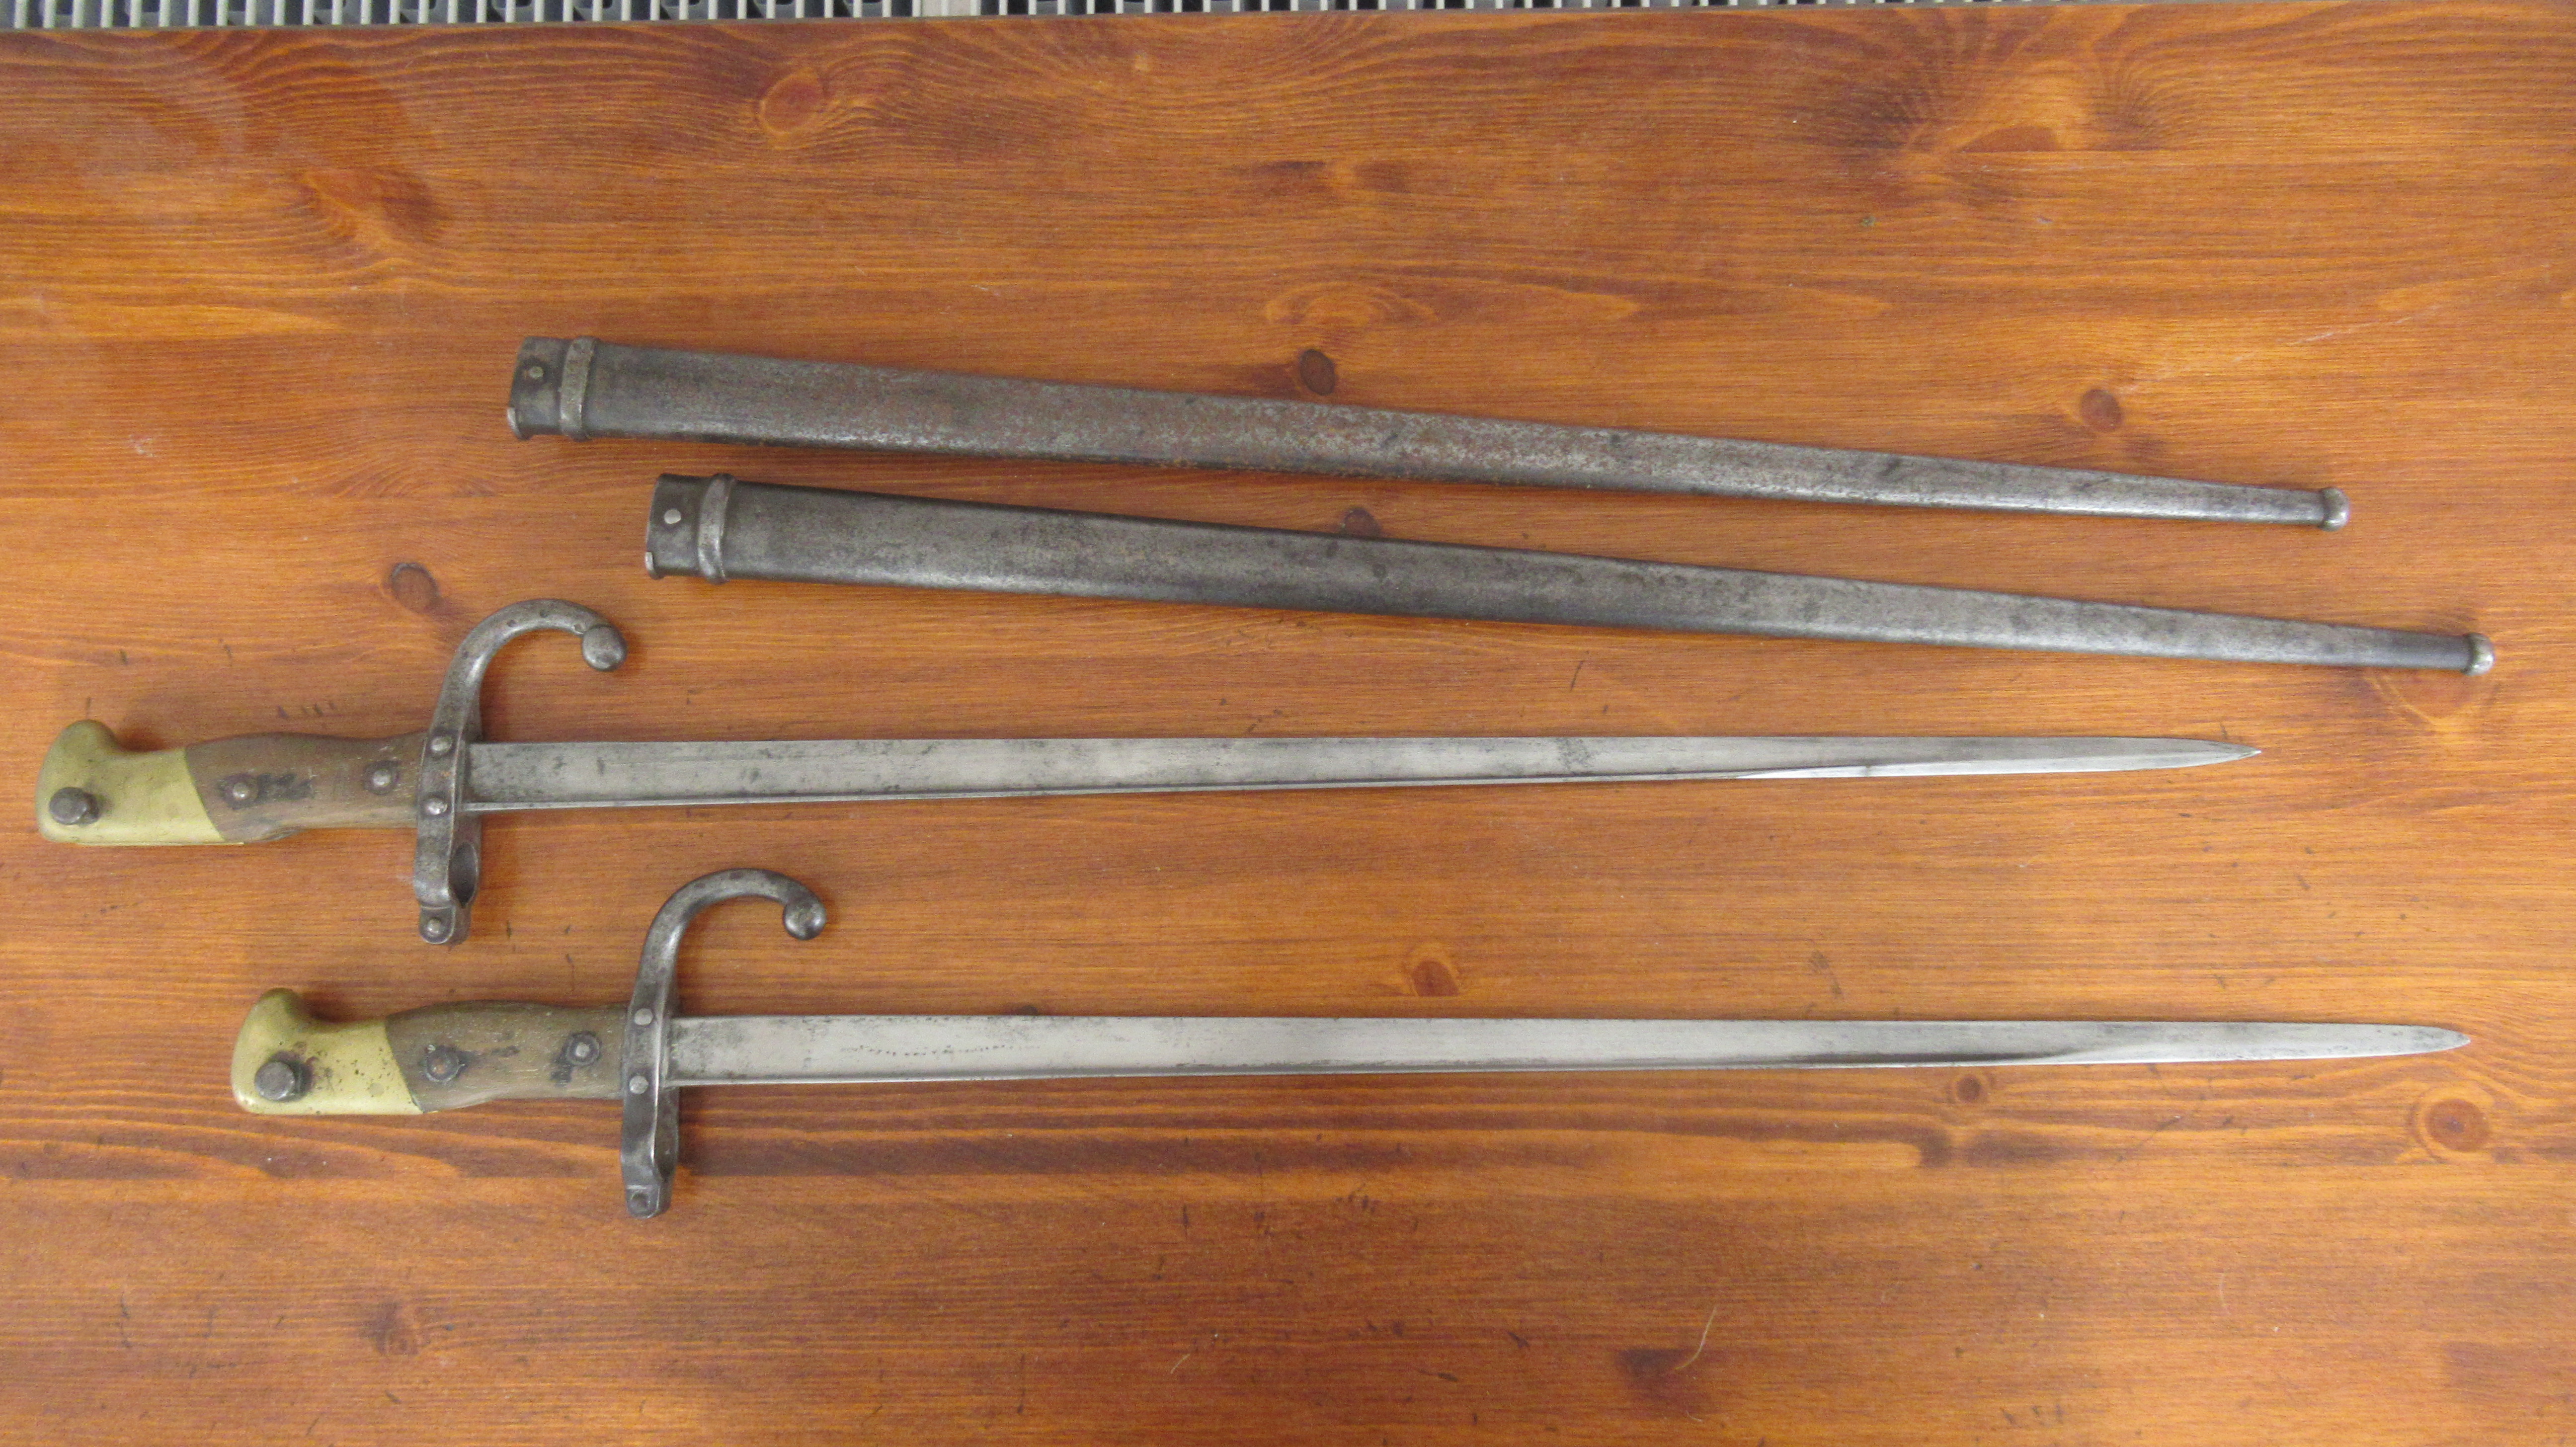 Two French 1874 pattern gras bayonets dated 1877 and 1879, 51cm blades with steel scabbards - Image 2 of 4